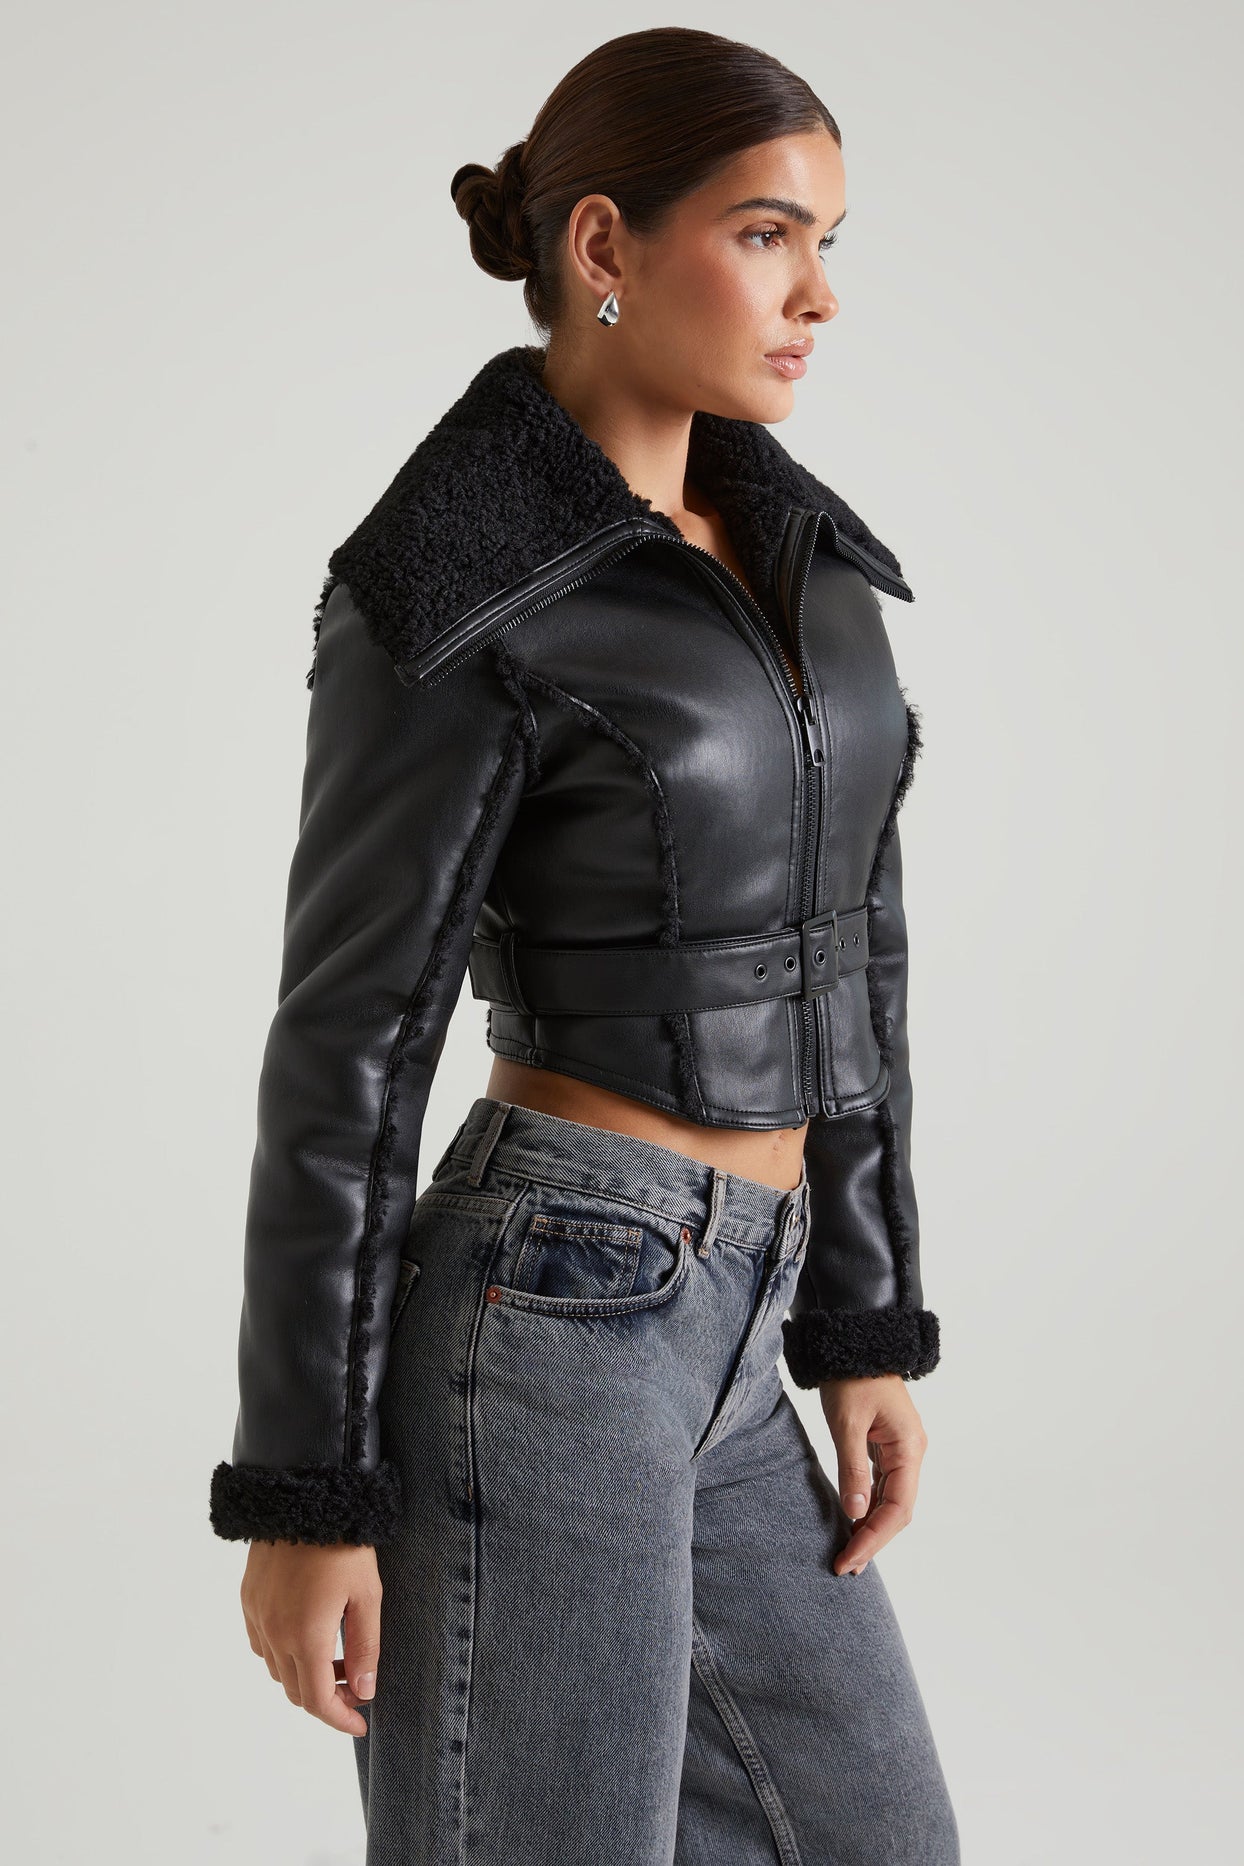 Jacket with Shearling Collar and Trim in Black